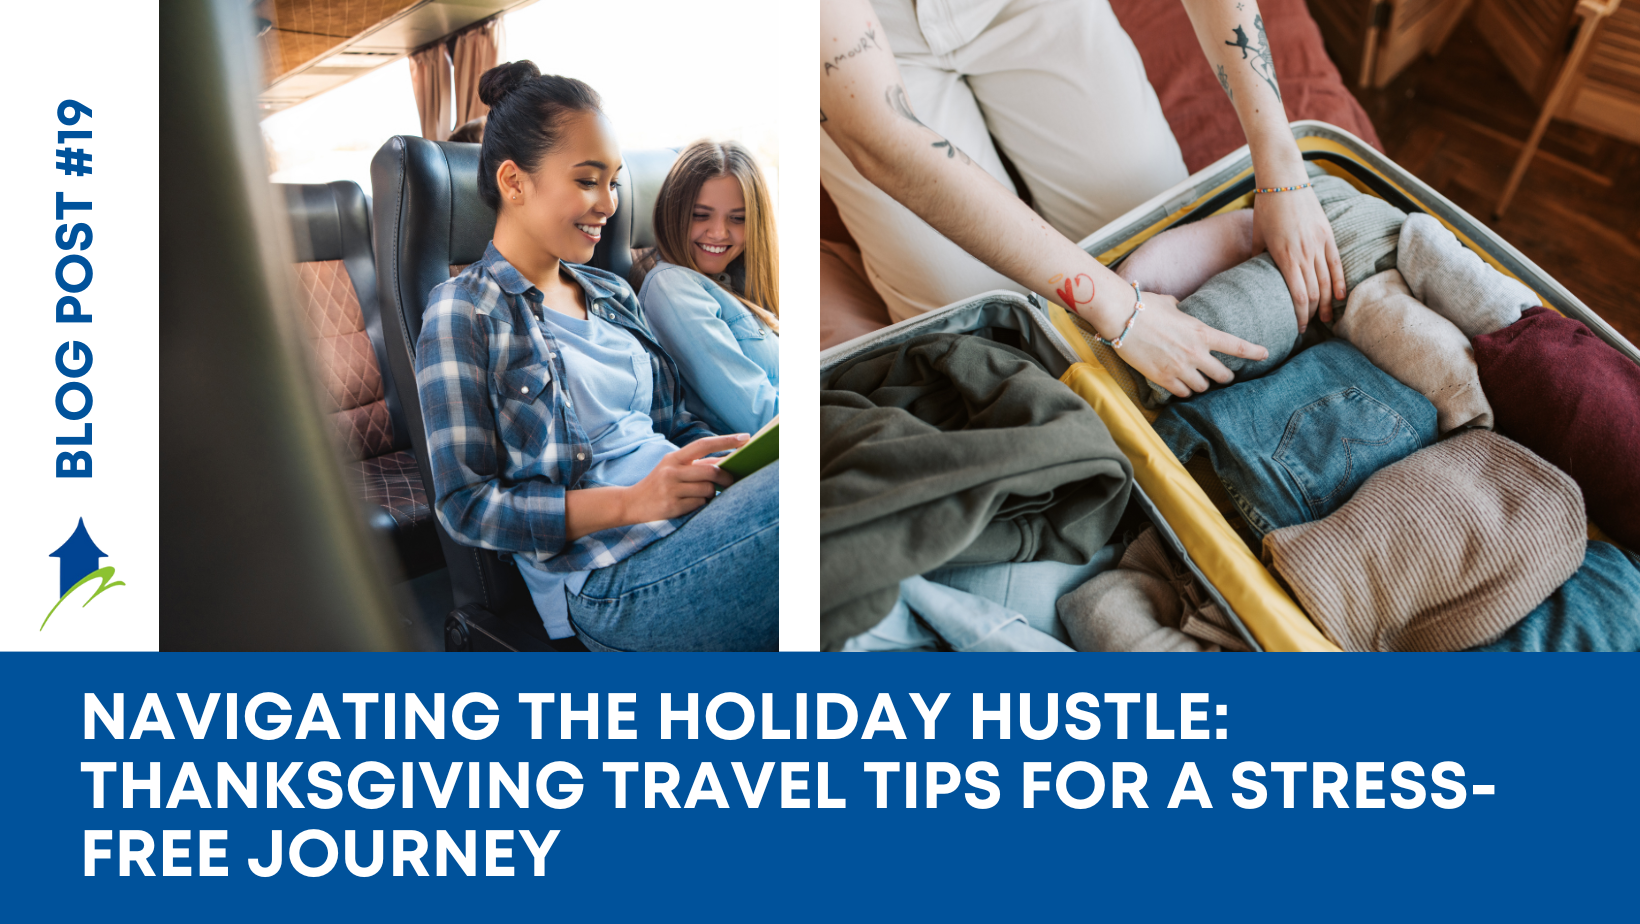 Navigating the Holiday Hustle: Thanksgiving Travel Tips for a Stress-Free Journey